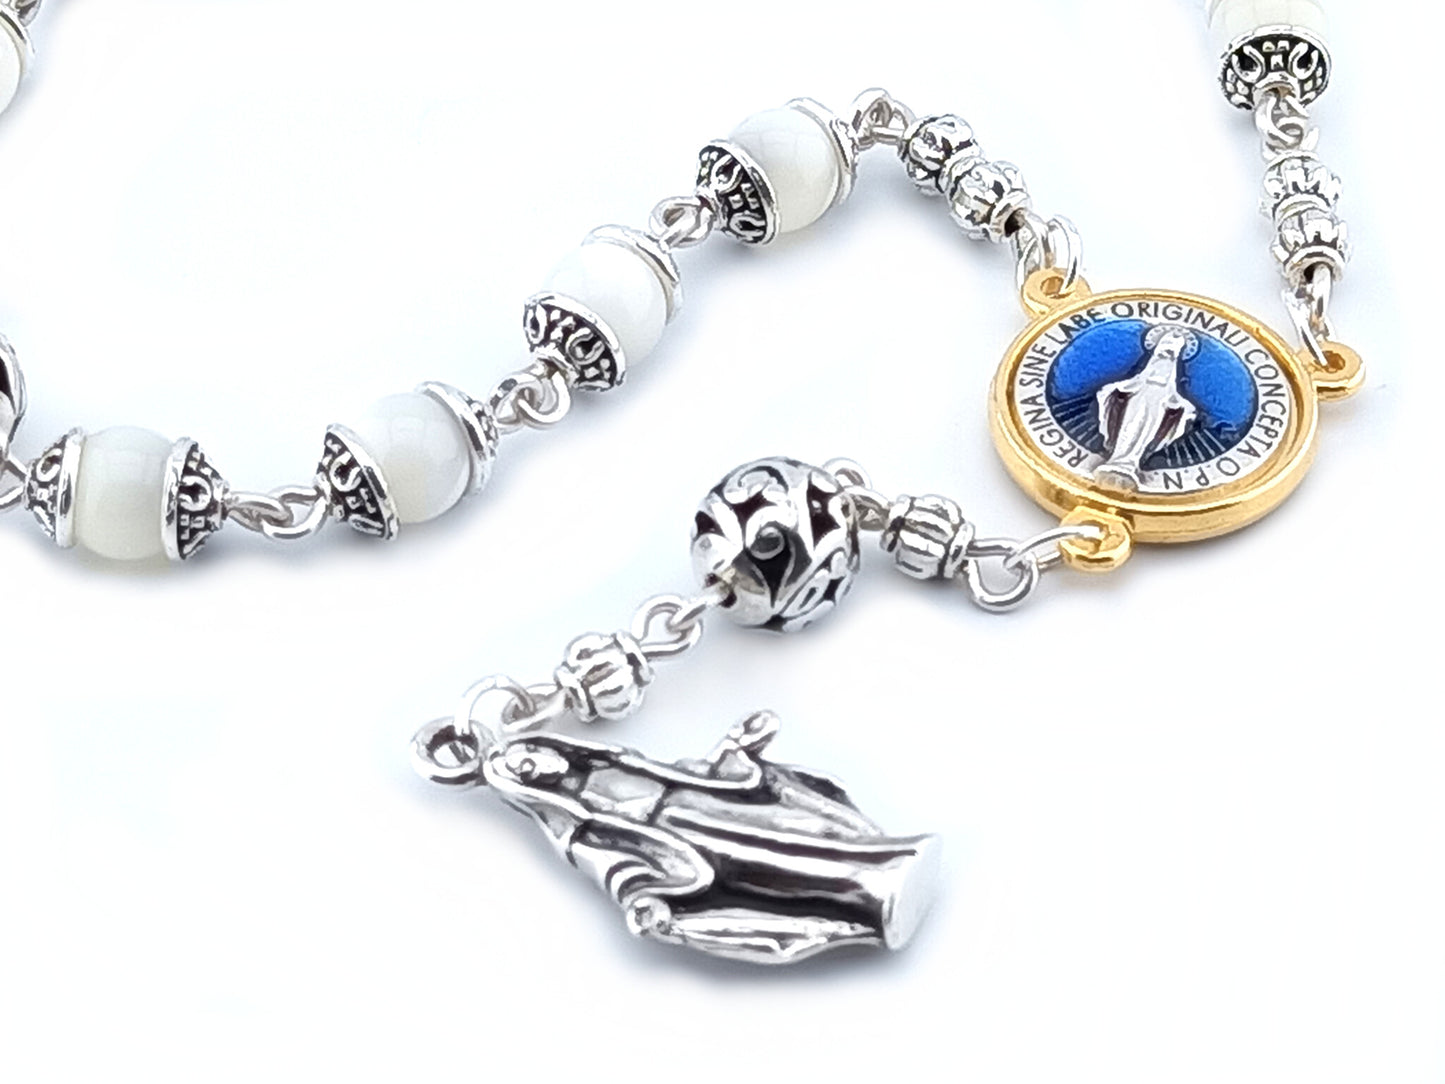 Immaculate Conception unique rosary beads single decade rosary in 925 solid sterling silver with golden Immaculate Conception centre medal and solid silver statue end medal.